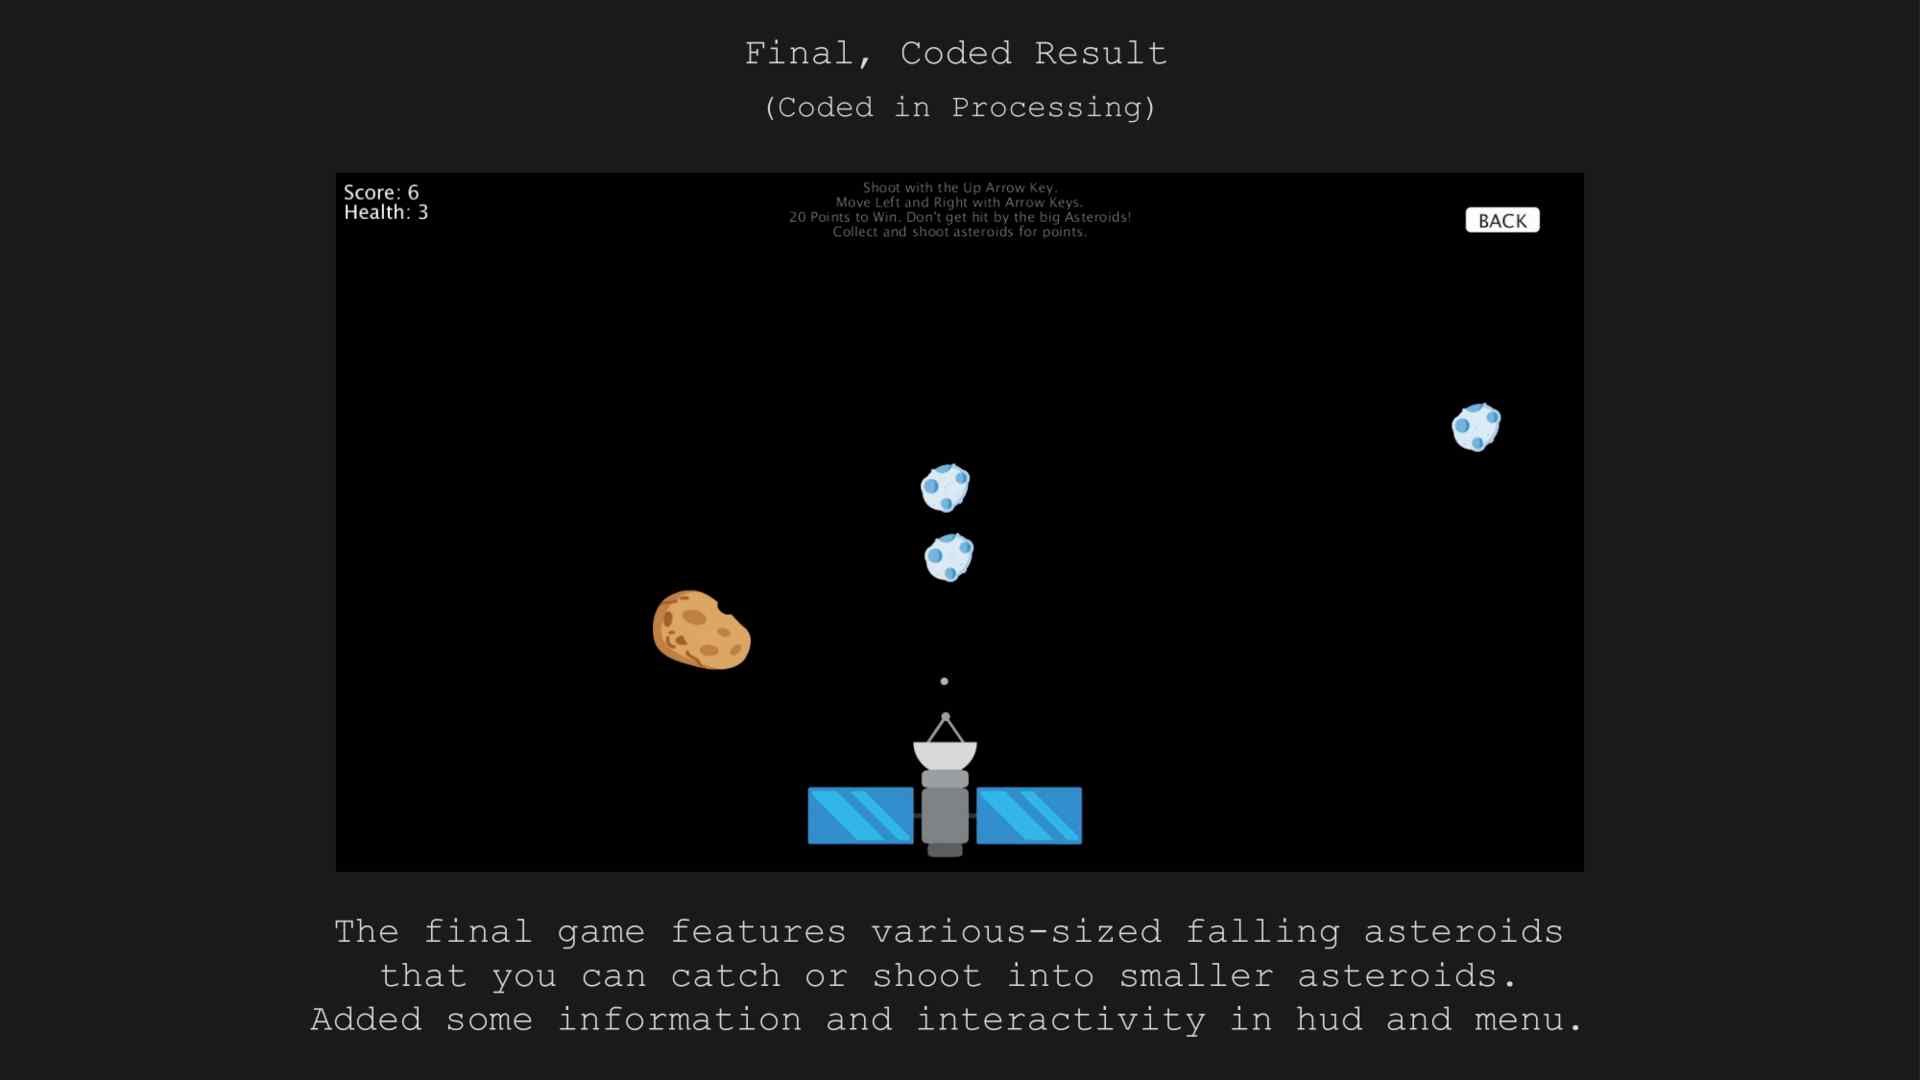 Asteroids Catch & Shoot – Final Result